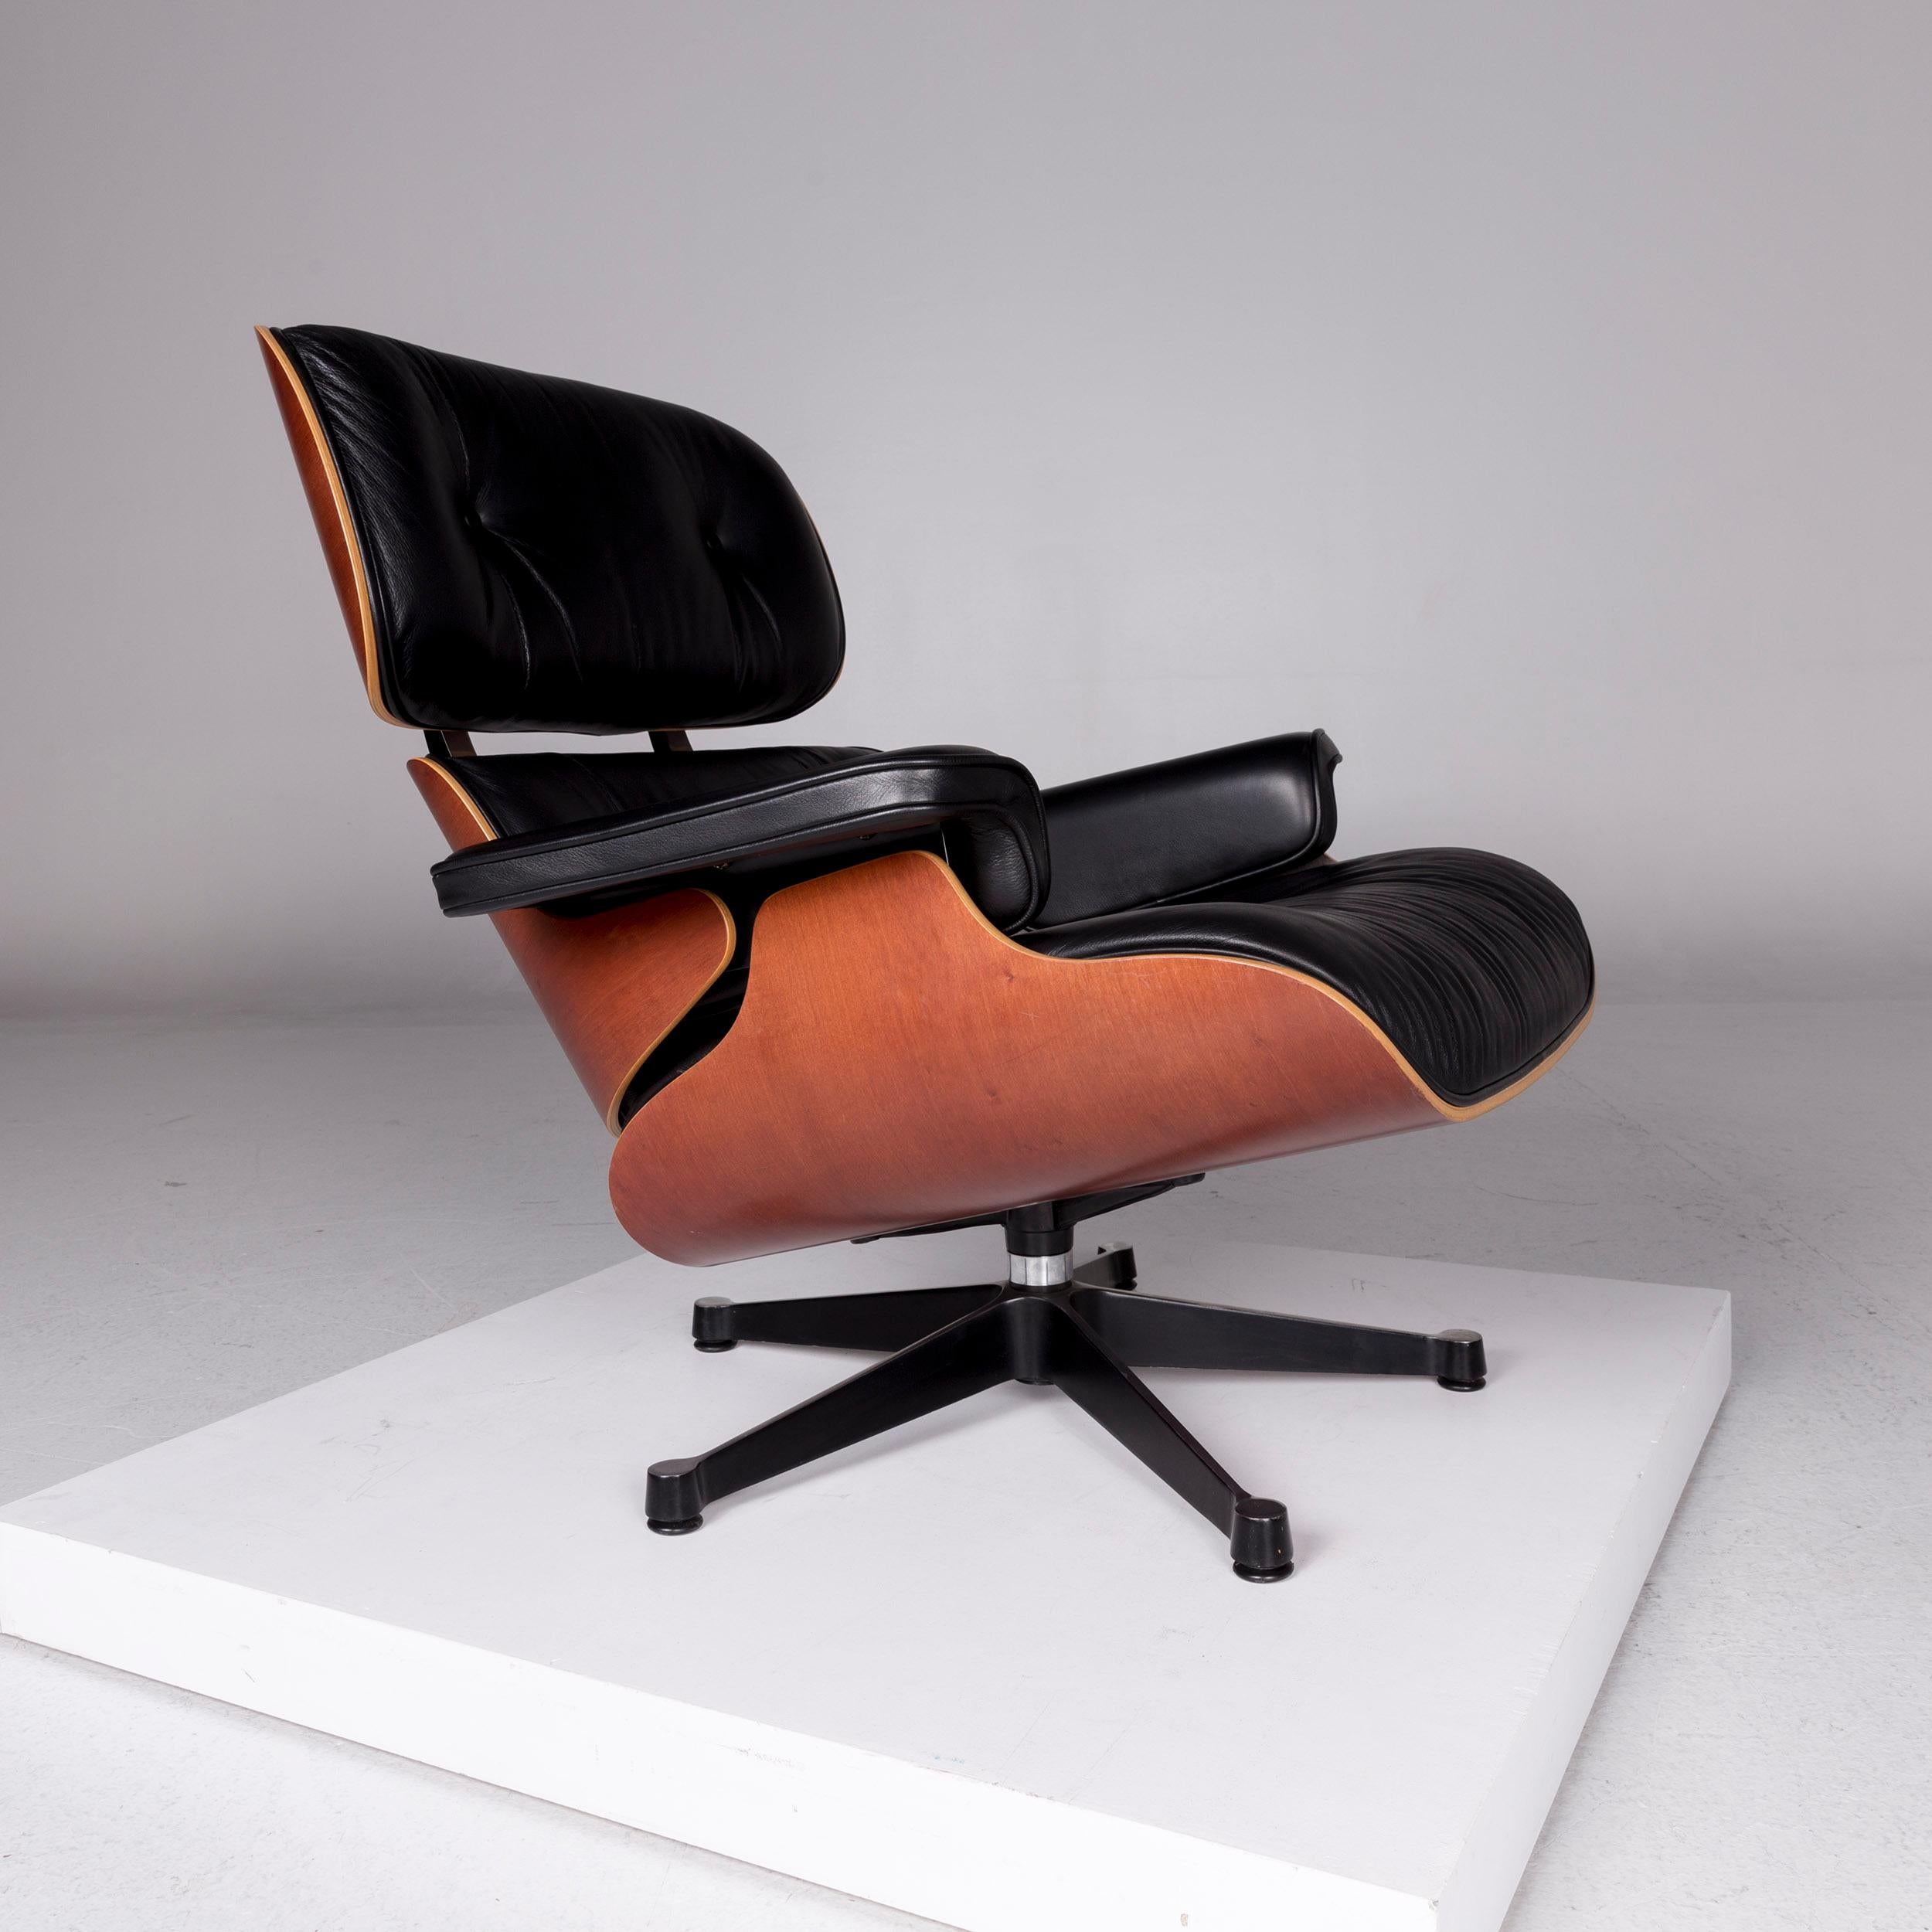 German Vitra Eames Lounge Chair Leather Armchair Black Charles & Ray Eames Club Chair For Sale